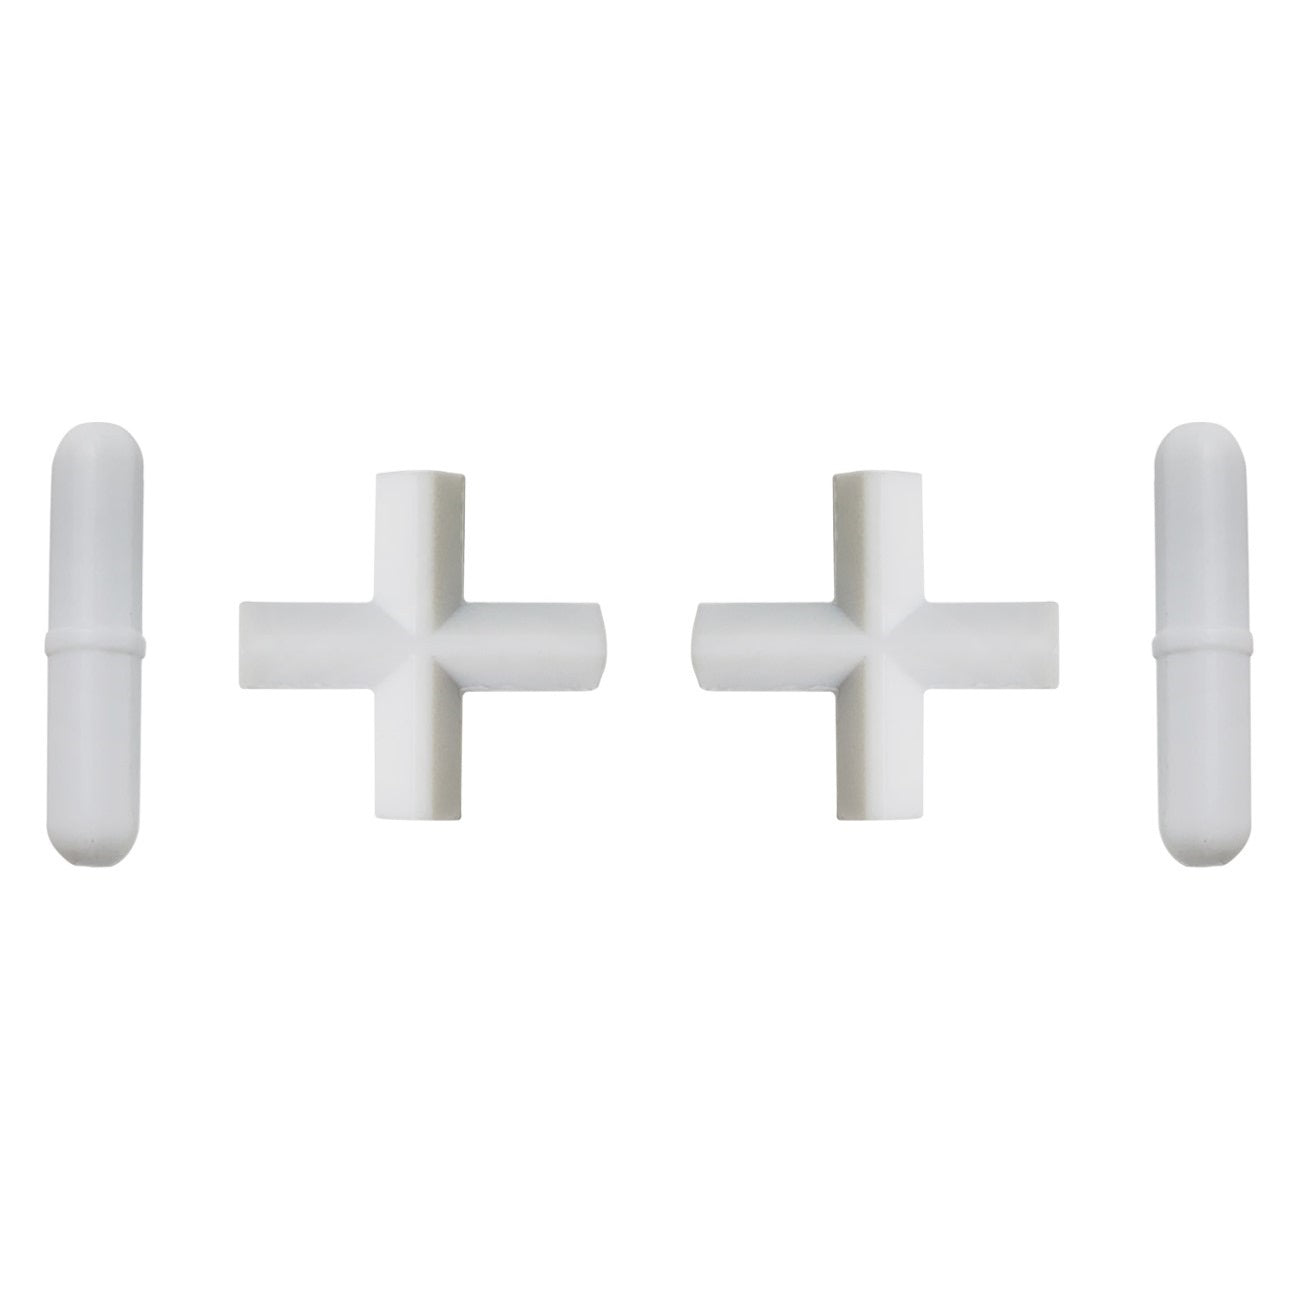 PTFE Stir Bars for Magnetic Stirrer Mixer (Pack of 4, 2 of Cross Type, 2 of Straight Type)